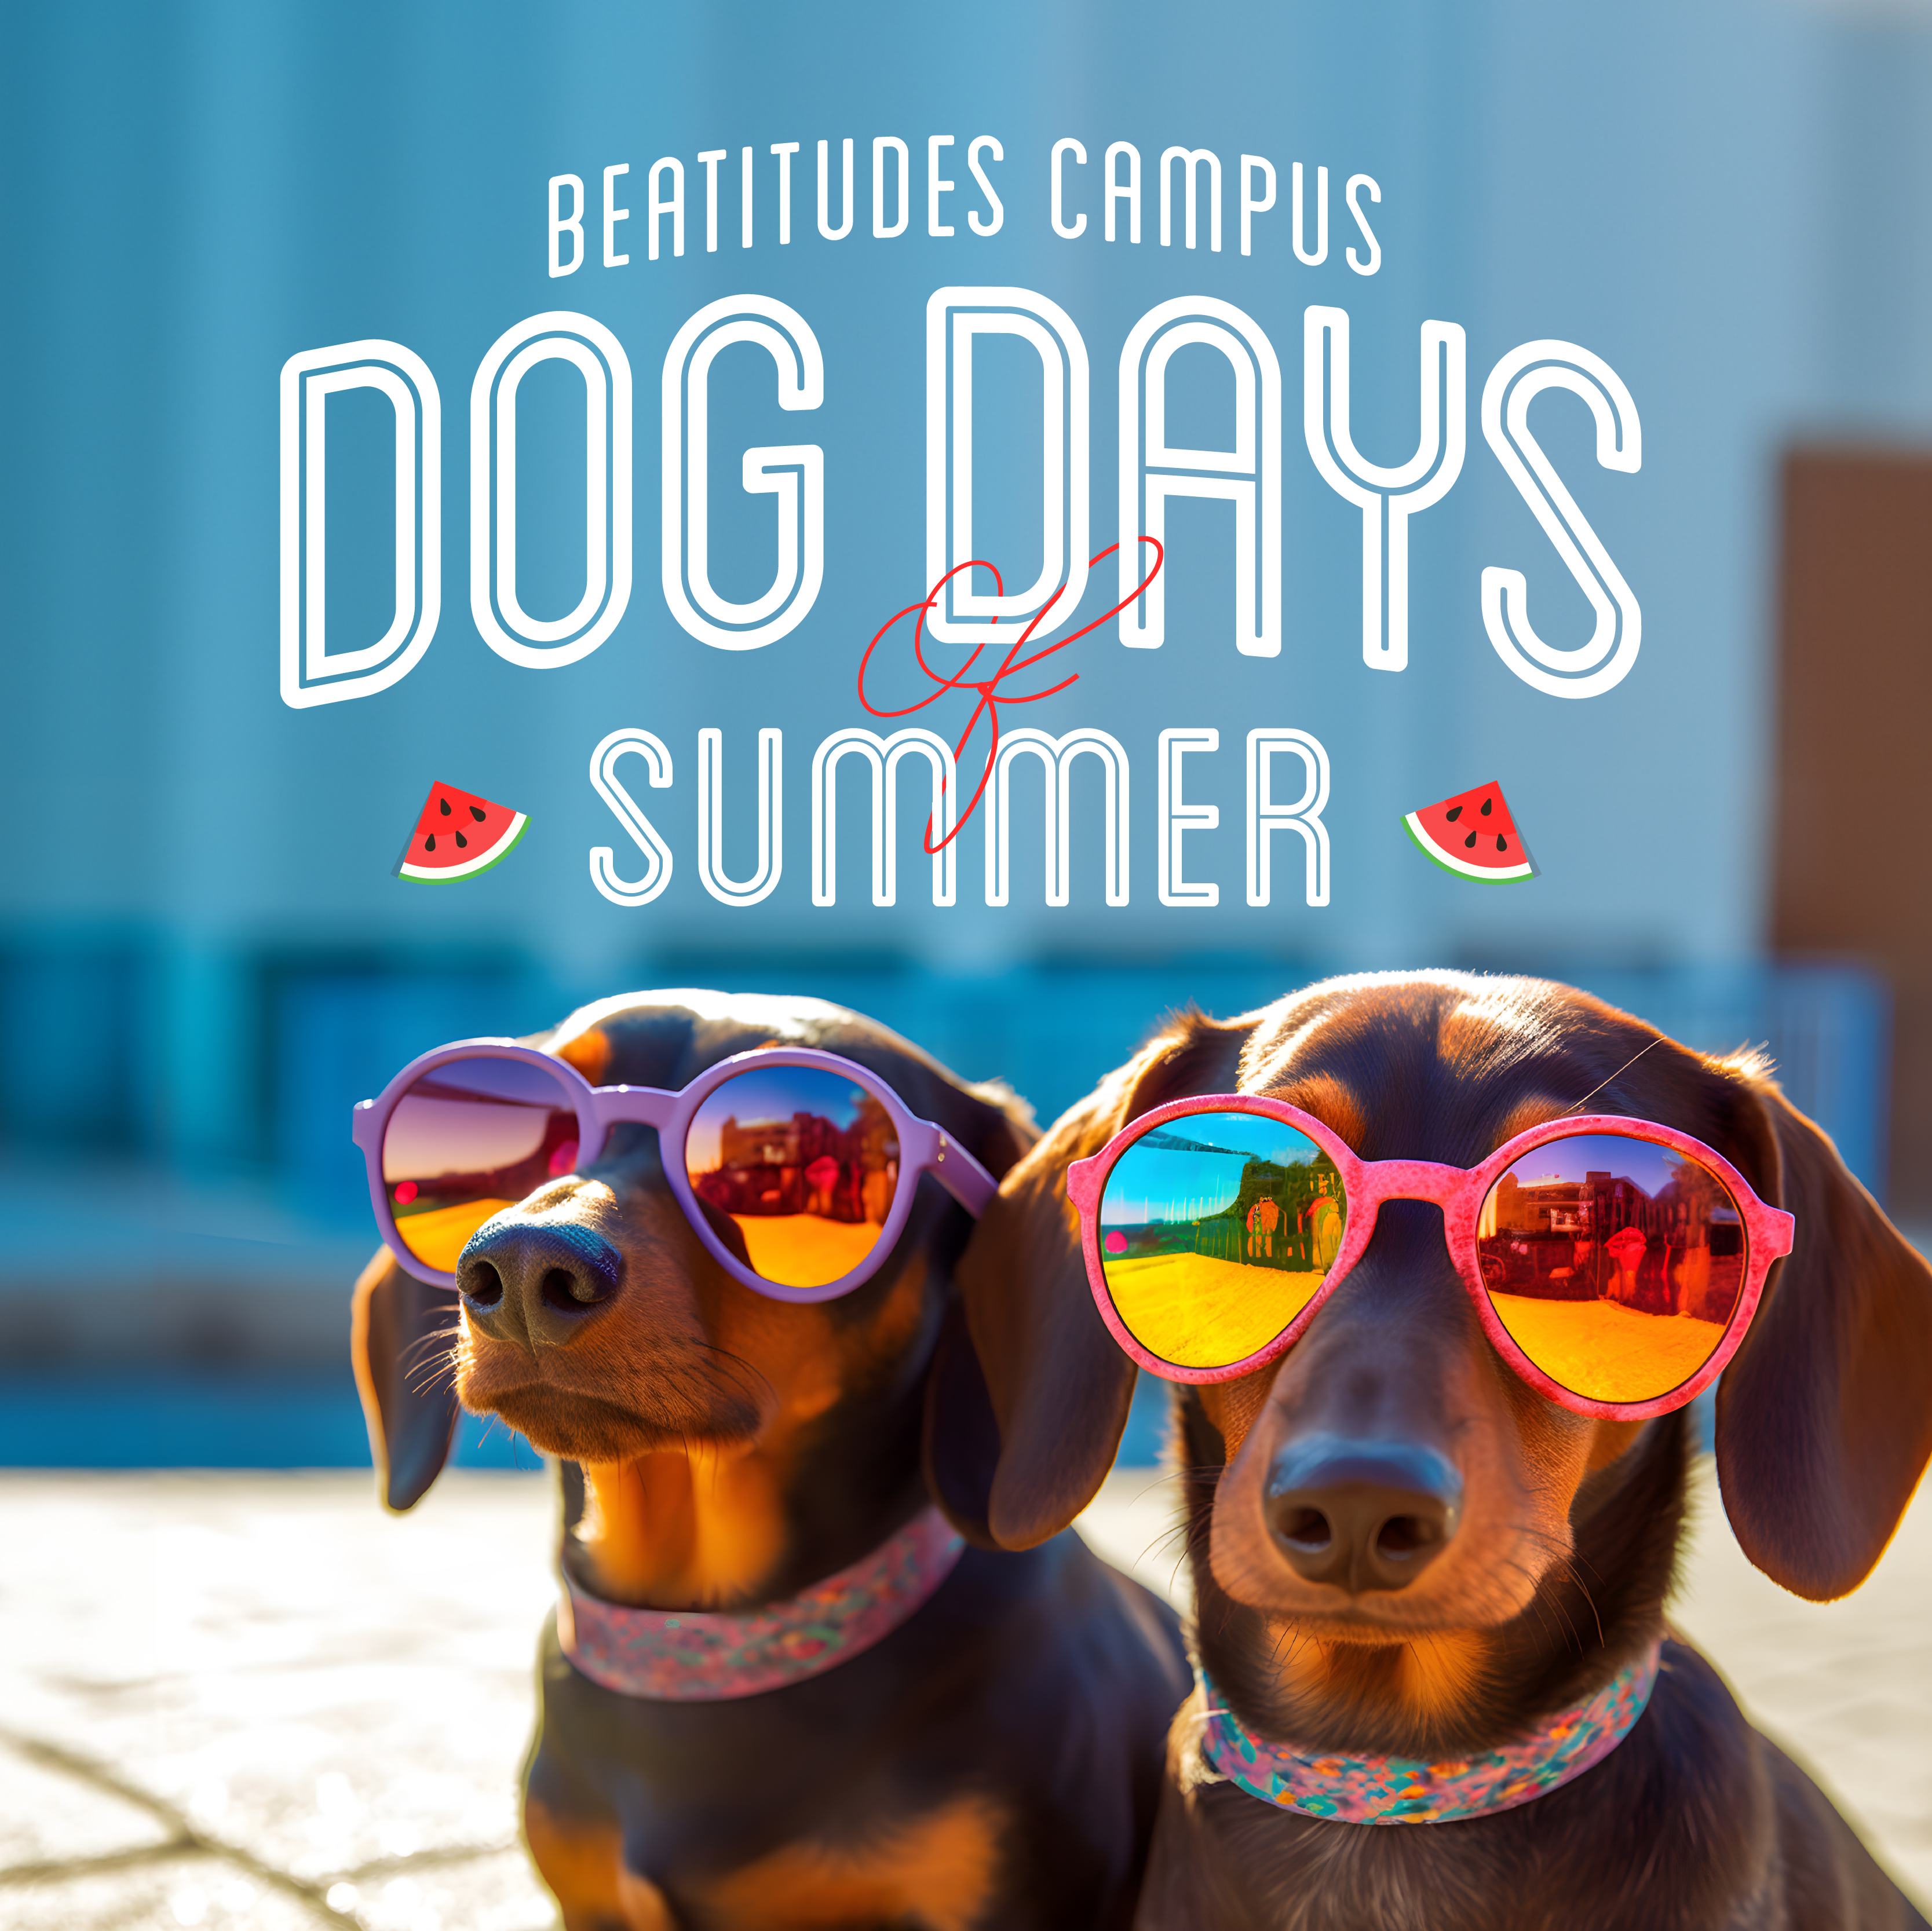 Dog Days of Summer event graphic with two dogs wearing reflective sunglasses.